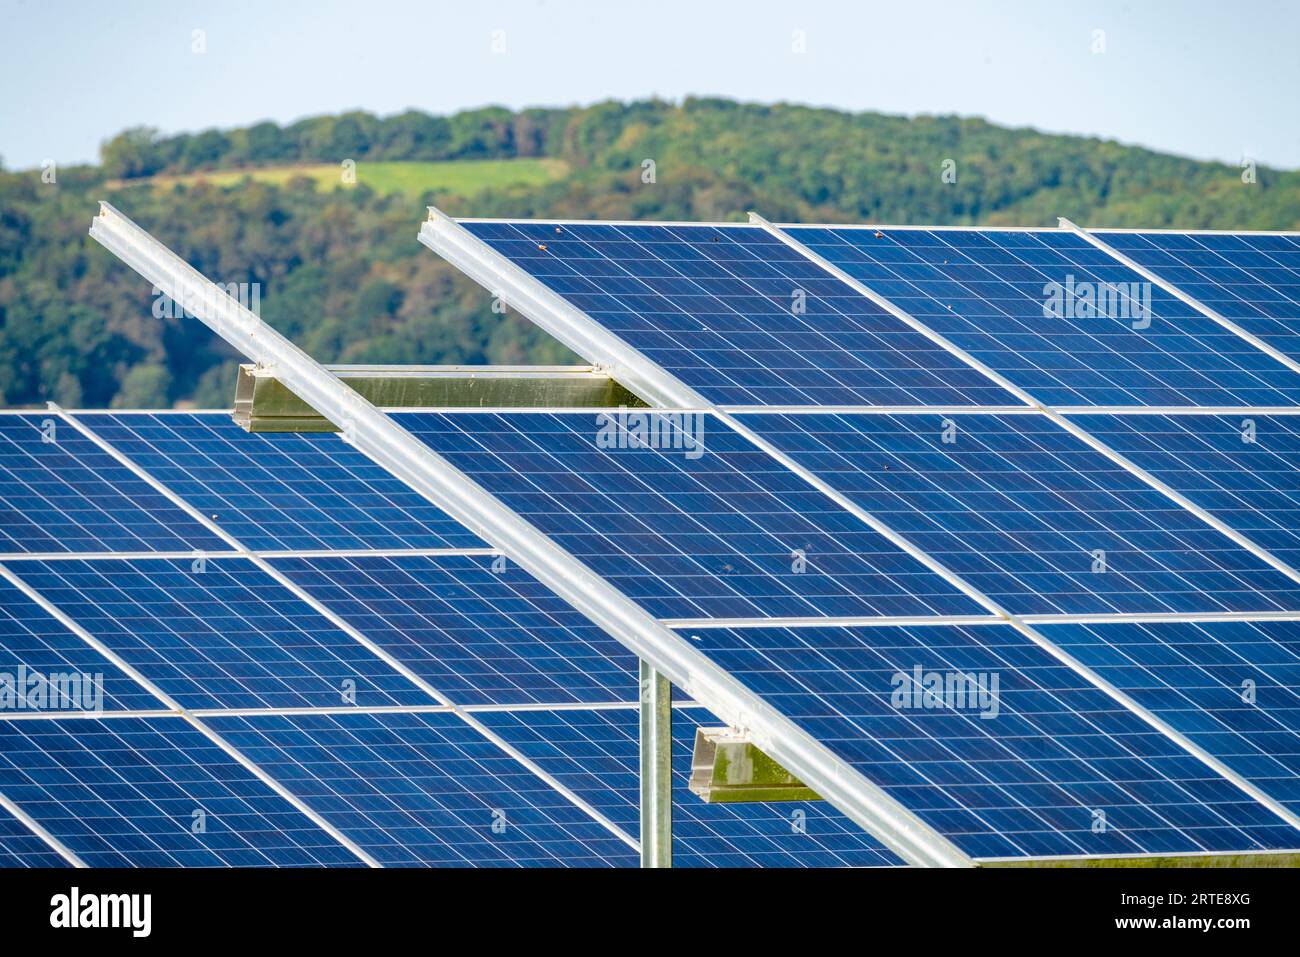 Close-up of solar cells,in rows of panels,at a site in the countryside, during the summertime in rural England,providing clean sustainable energy to l Stock Photo